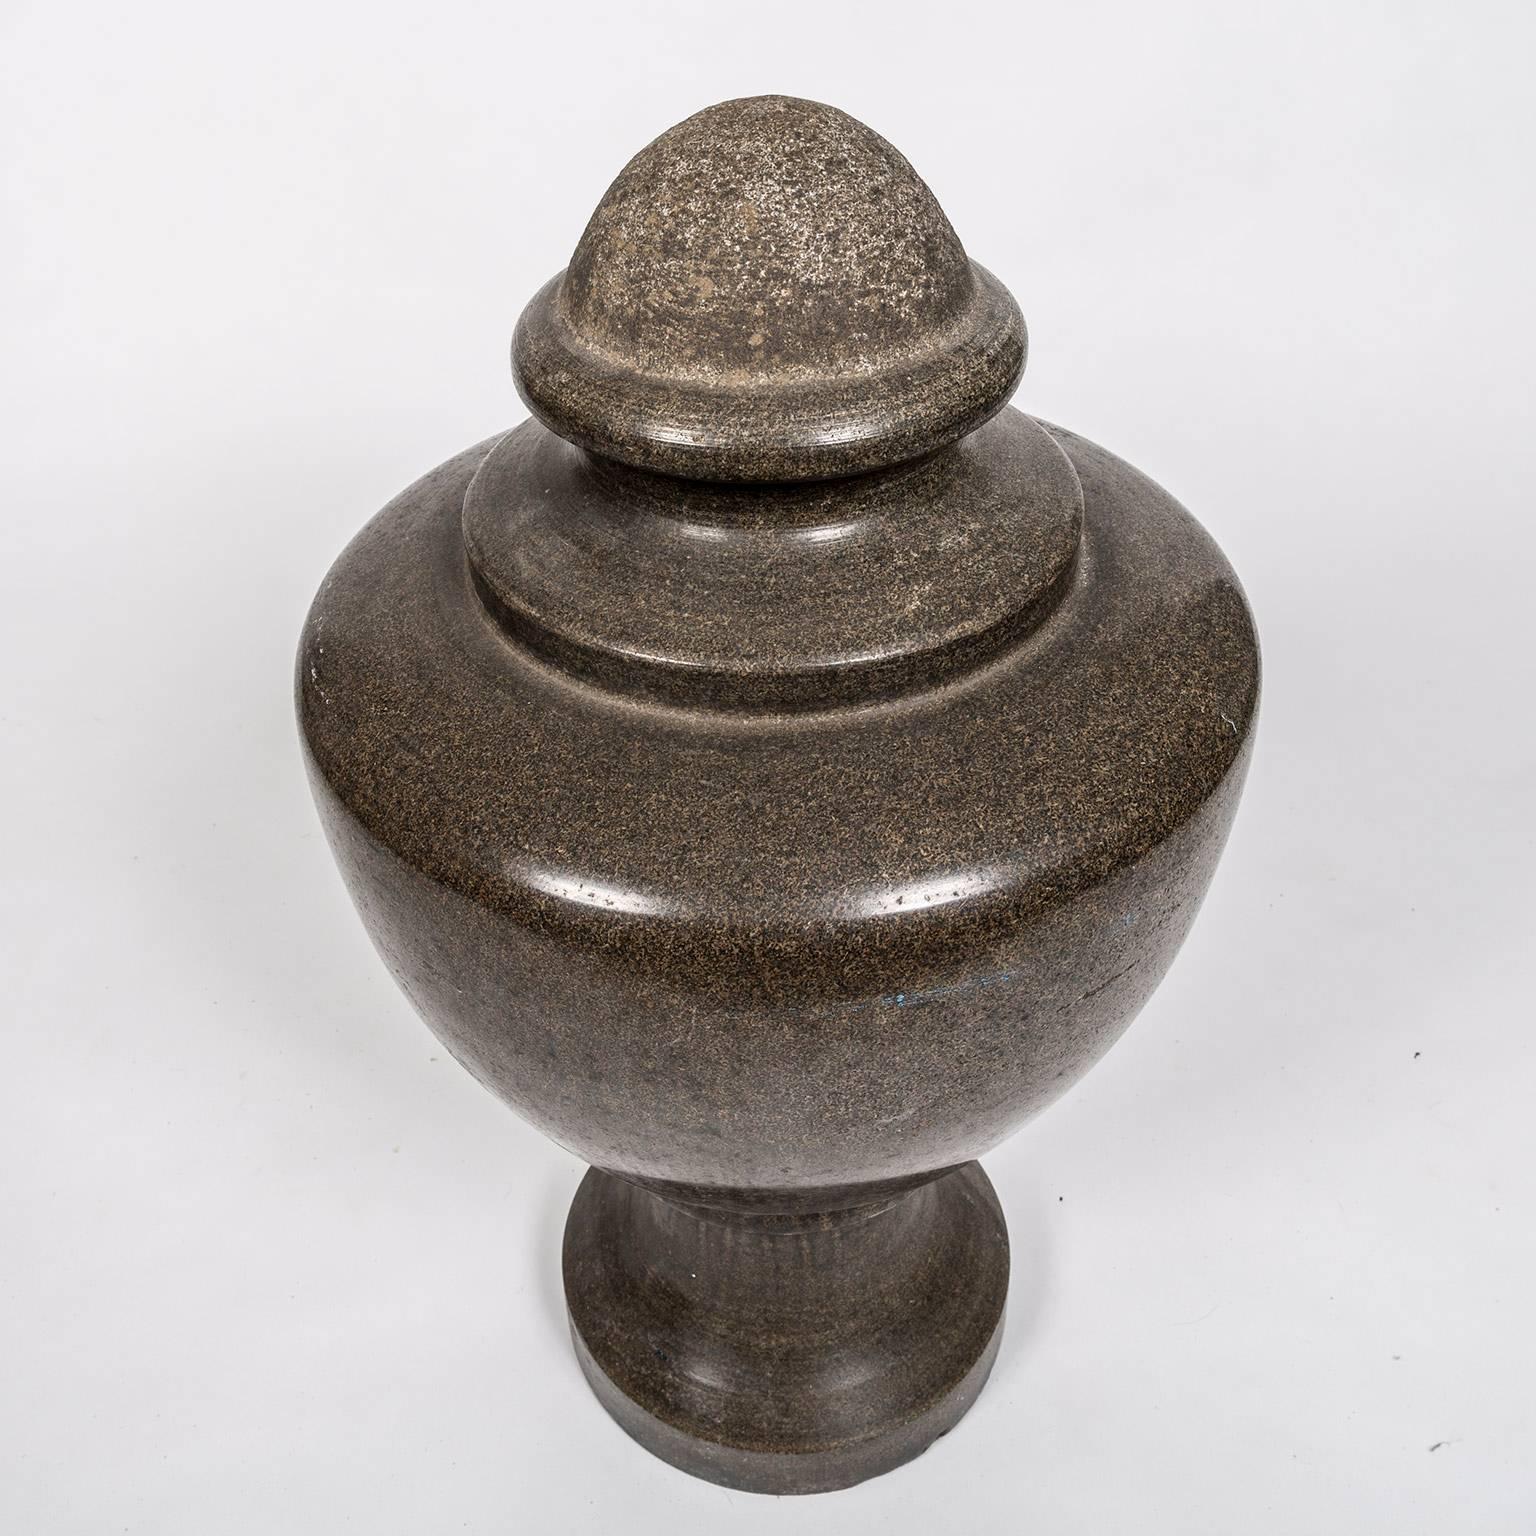 19th century solid granite stone Grand Tour style decorative vase. Granite is a very hard igneous rock that has a very pleasing granular decoration. These two qualities are responsible for its use in architectural and decorative elements from as far